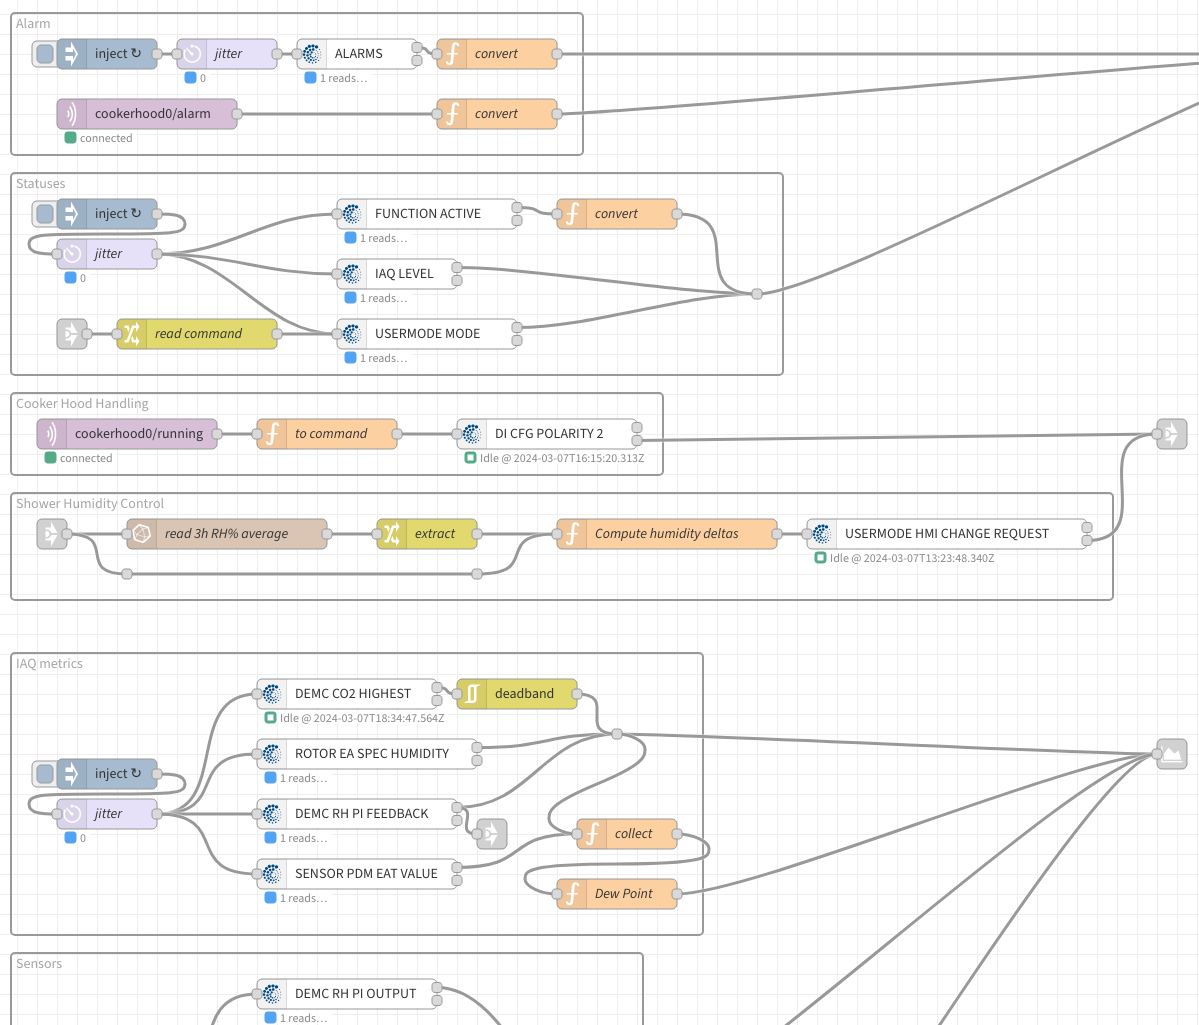 For example here's a part of my flow, with all sorts of interesting data being saved to InfluxDB
for later viewing and graphing. This flow also implements some automations such as requesting a
refresh mode after a shower is taken, or a cooker hood mode when the cooker hood is turned
on.